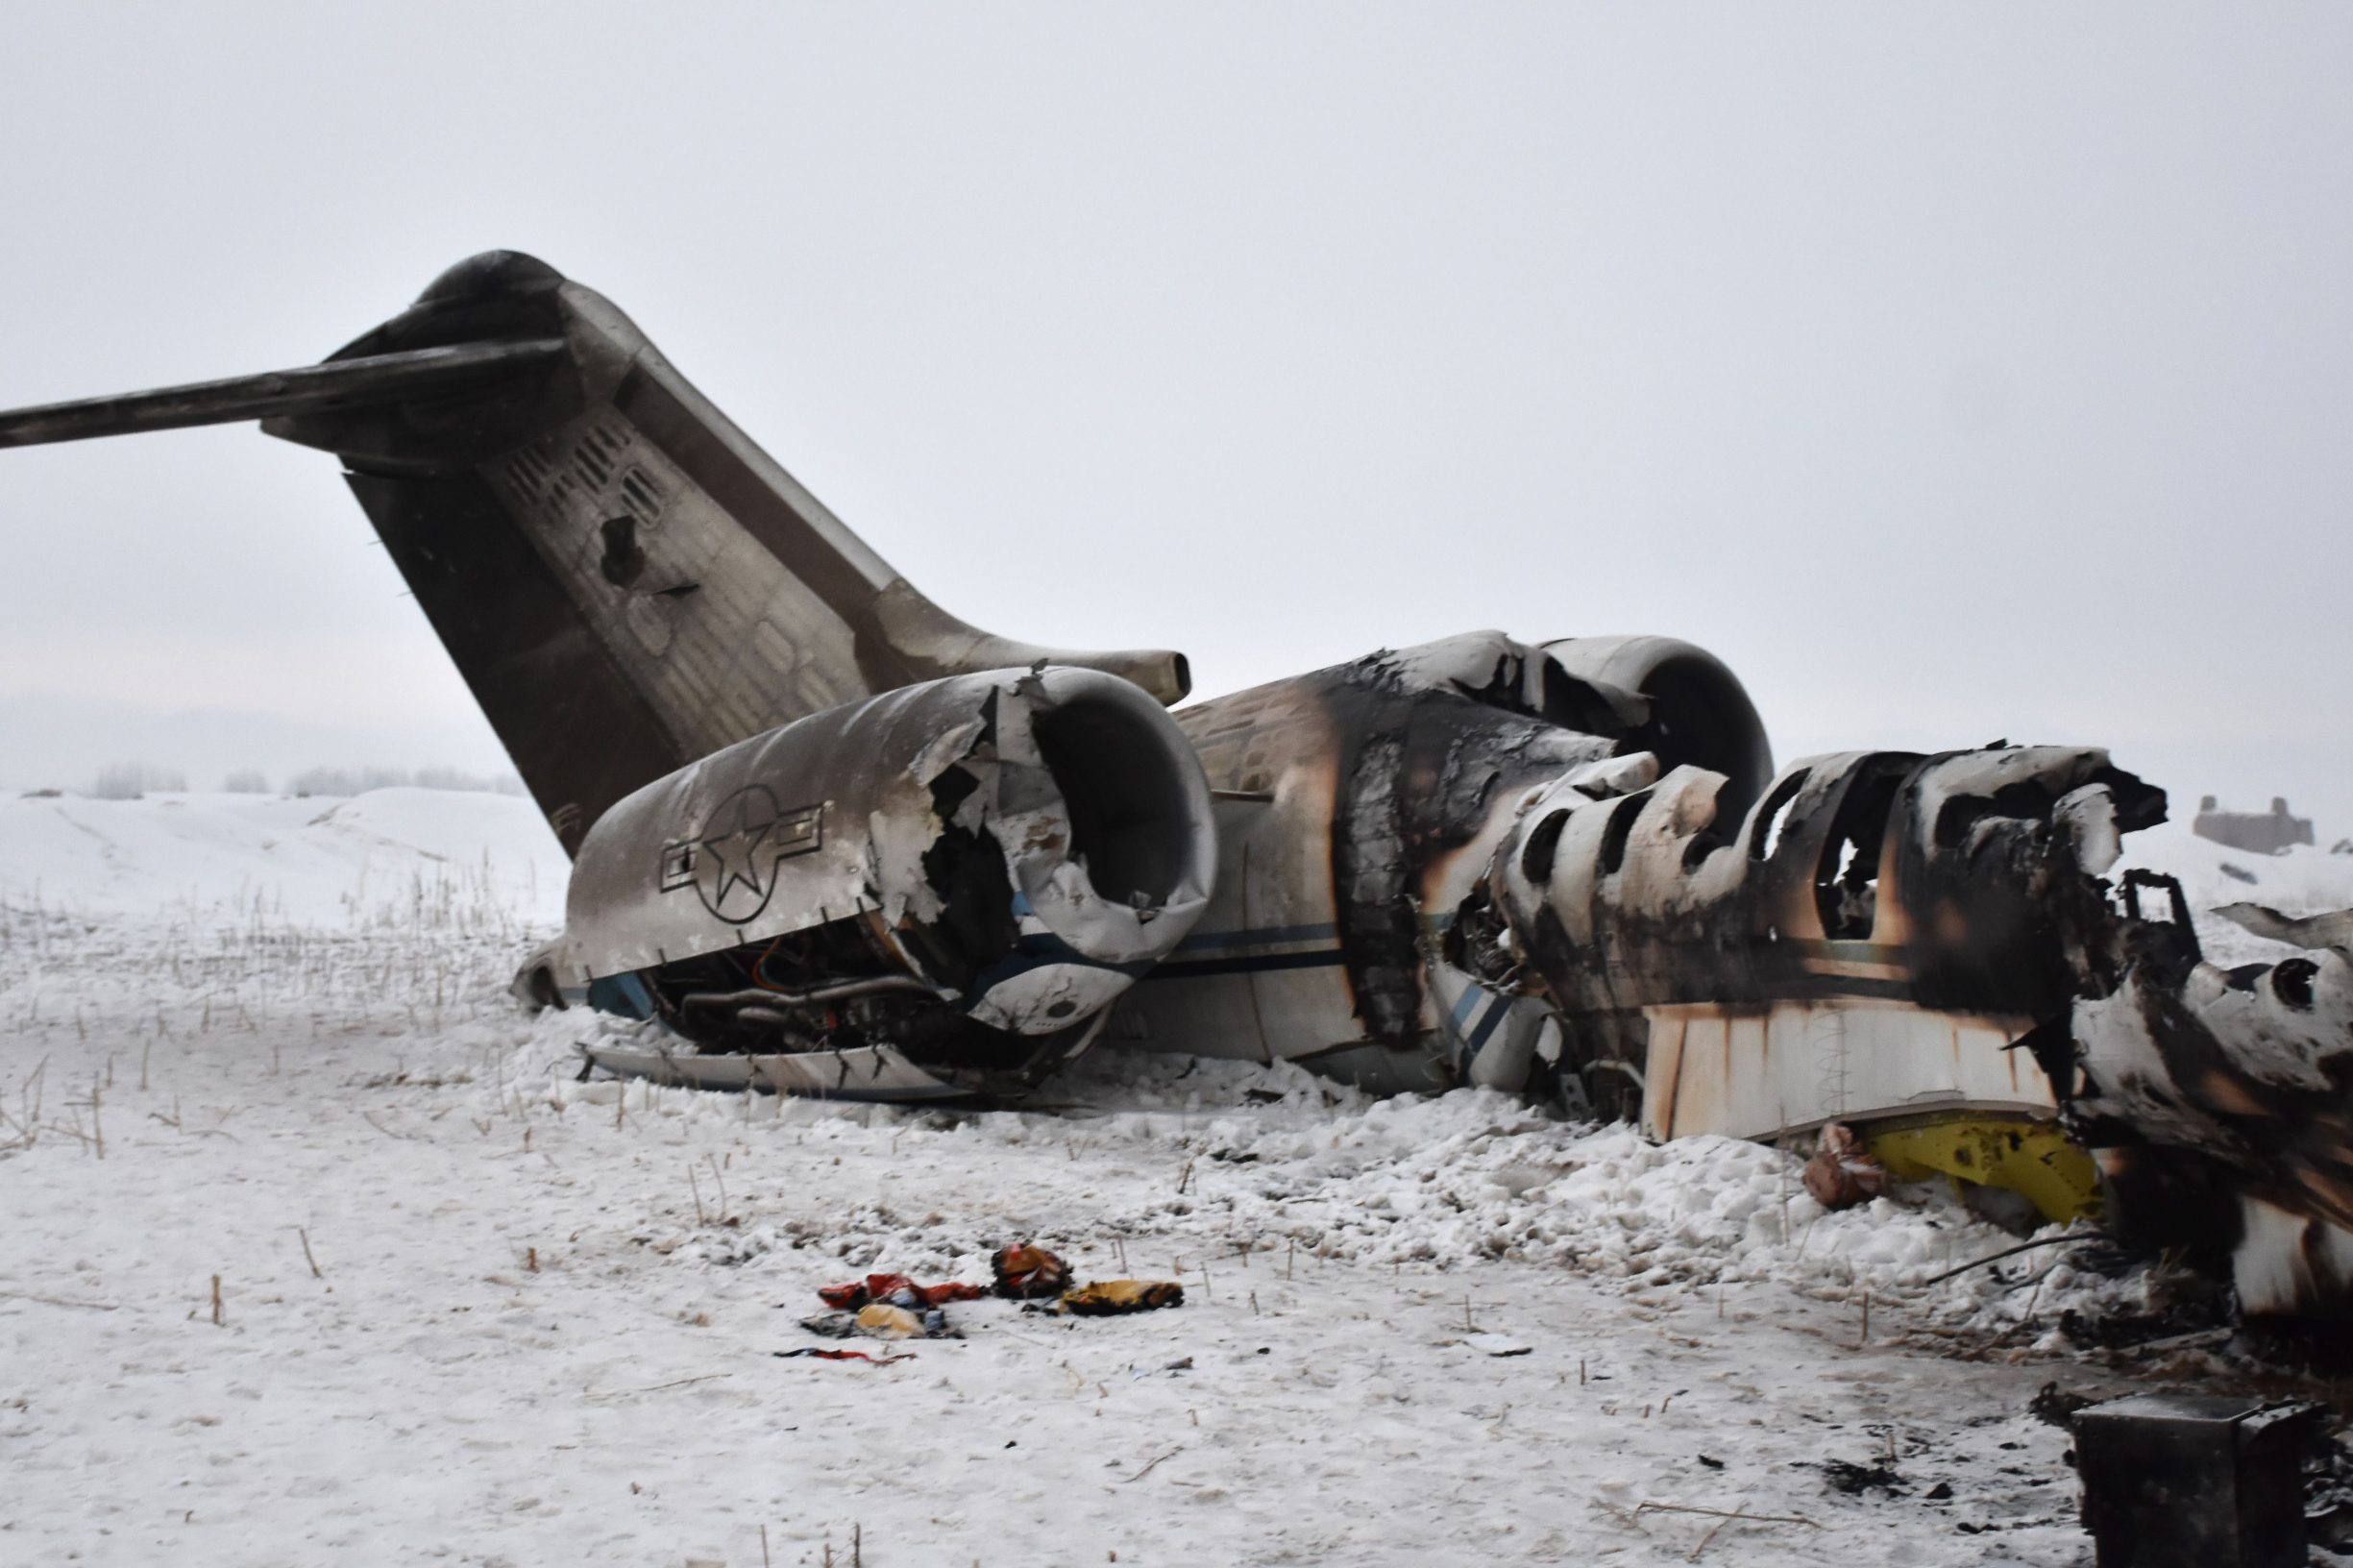 TOPSHOT - In this photograph taken on January 27, 2020 the wreckage of a US Bombardier E-11A jet is seen after it crashed in mountainous territory of Deh Yak district in Ghazni Province. - A US military jet crashed in mountainous territory in eastern Afghanistan, where there is a heavy Taliban presence, the Pentagon confirmed on January 27, rejecting the insurgents' suggestions that it was shot down. (Photo by STR / AFP)